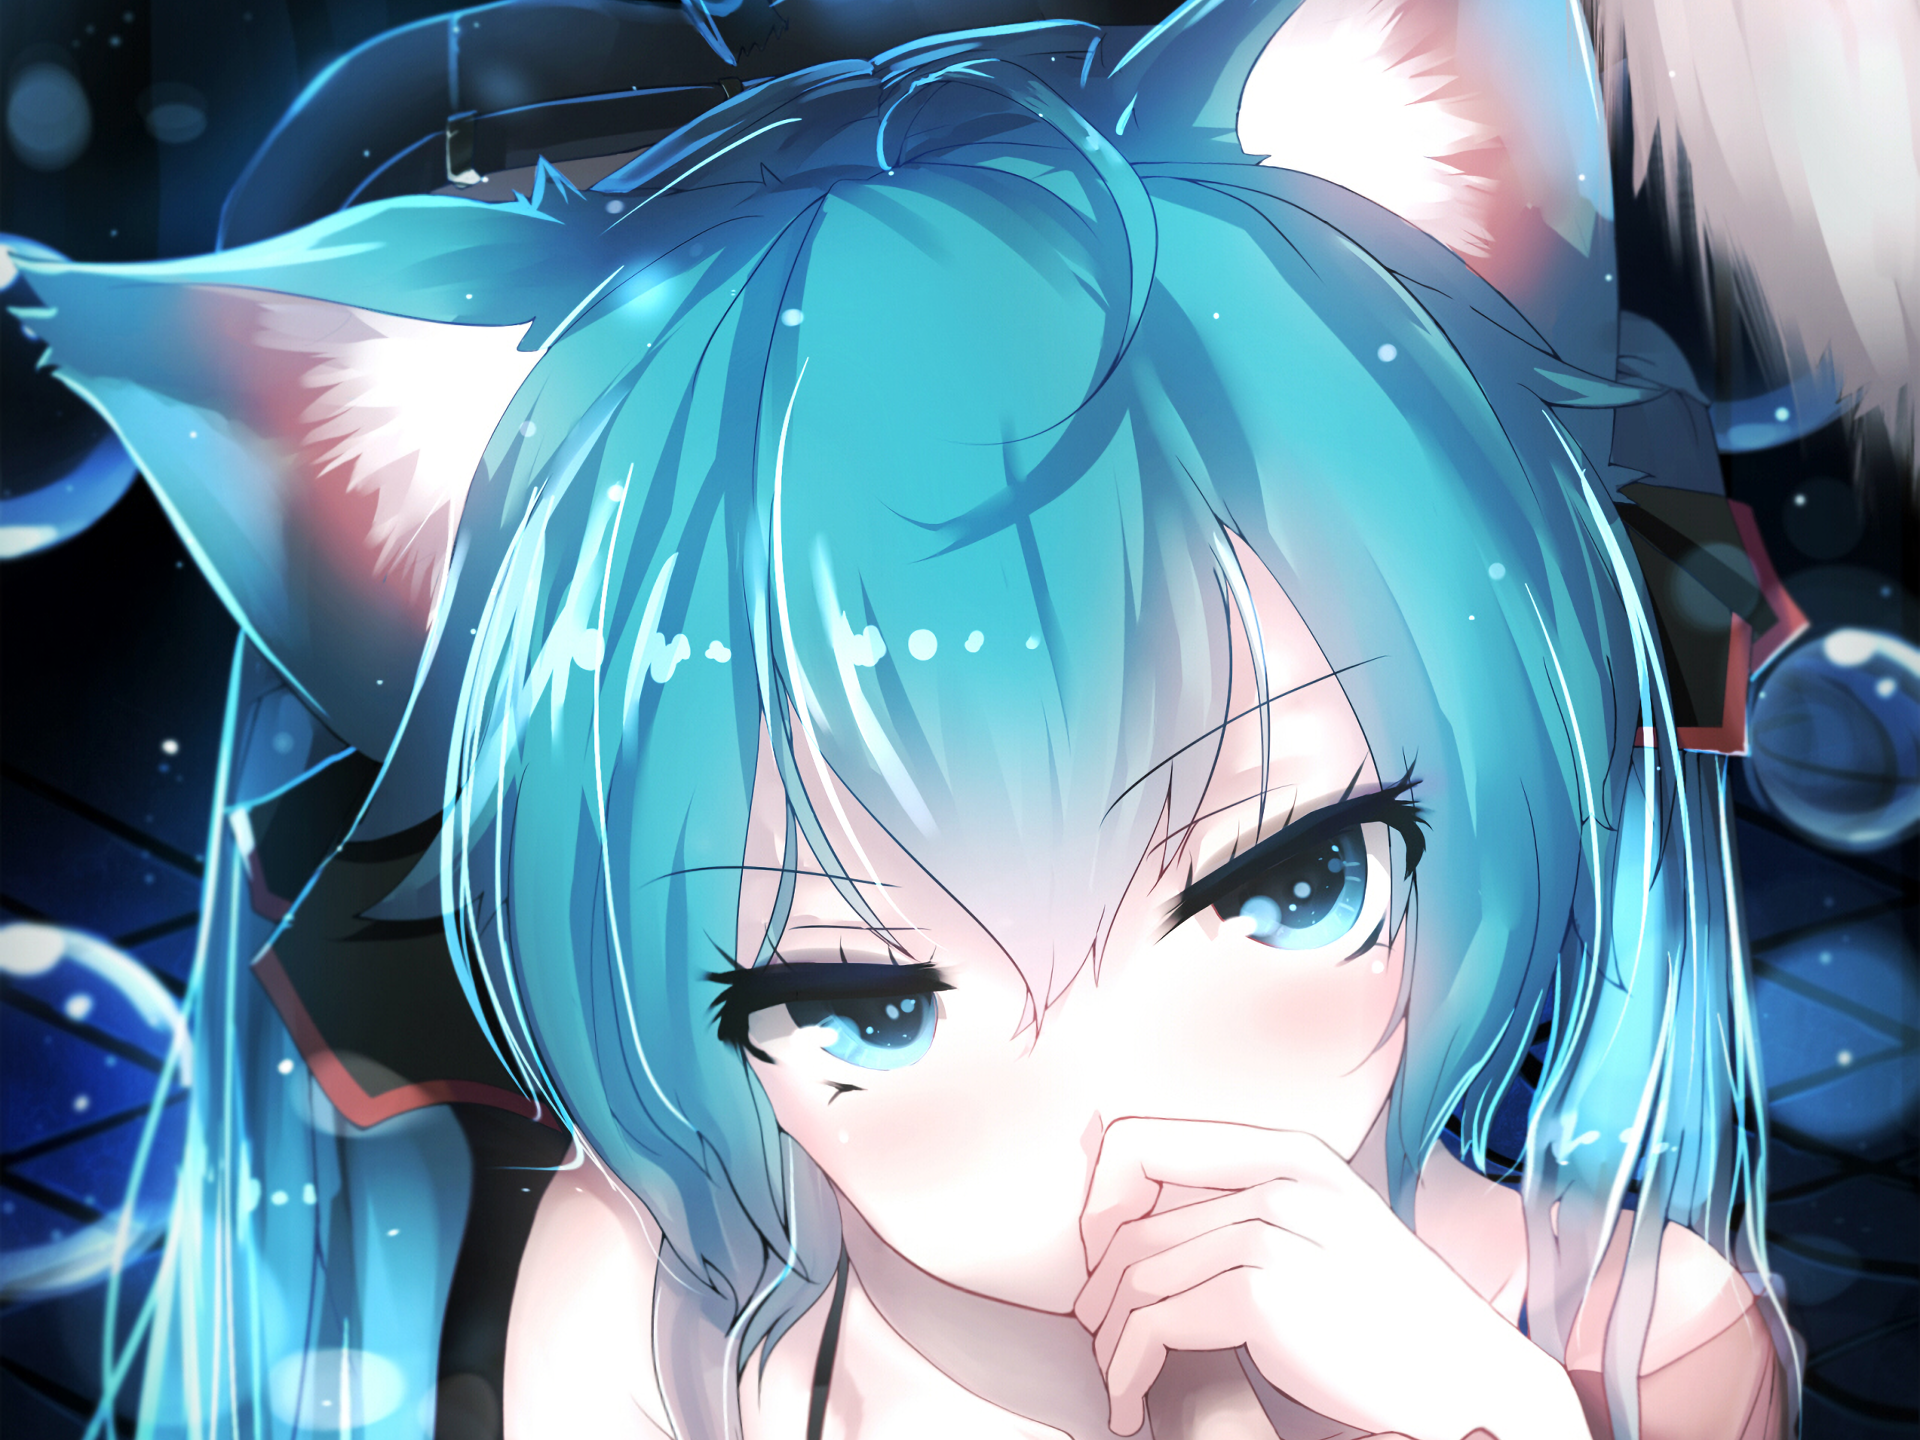 Hatsune Miku Cat Girl Anime Vocaloid Twintails Bubbles Long Hair Blue Hair Blue Eyes Ribbons Looking 1920x1440